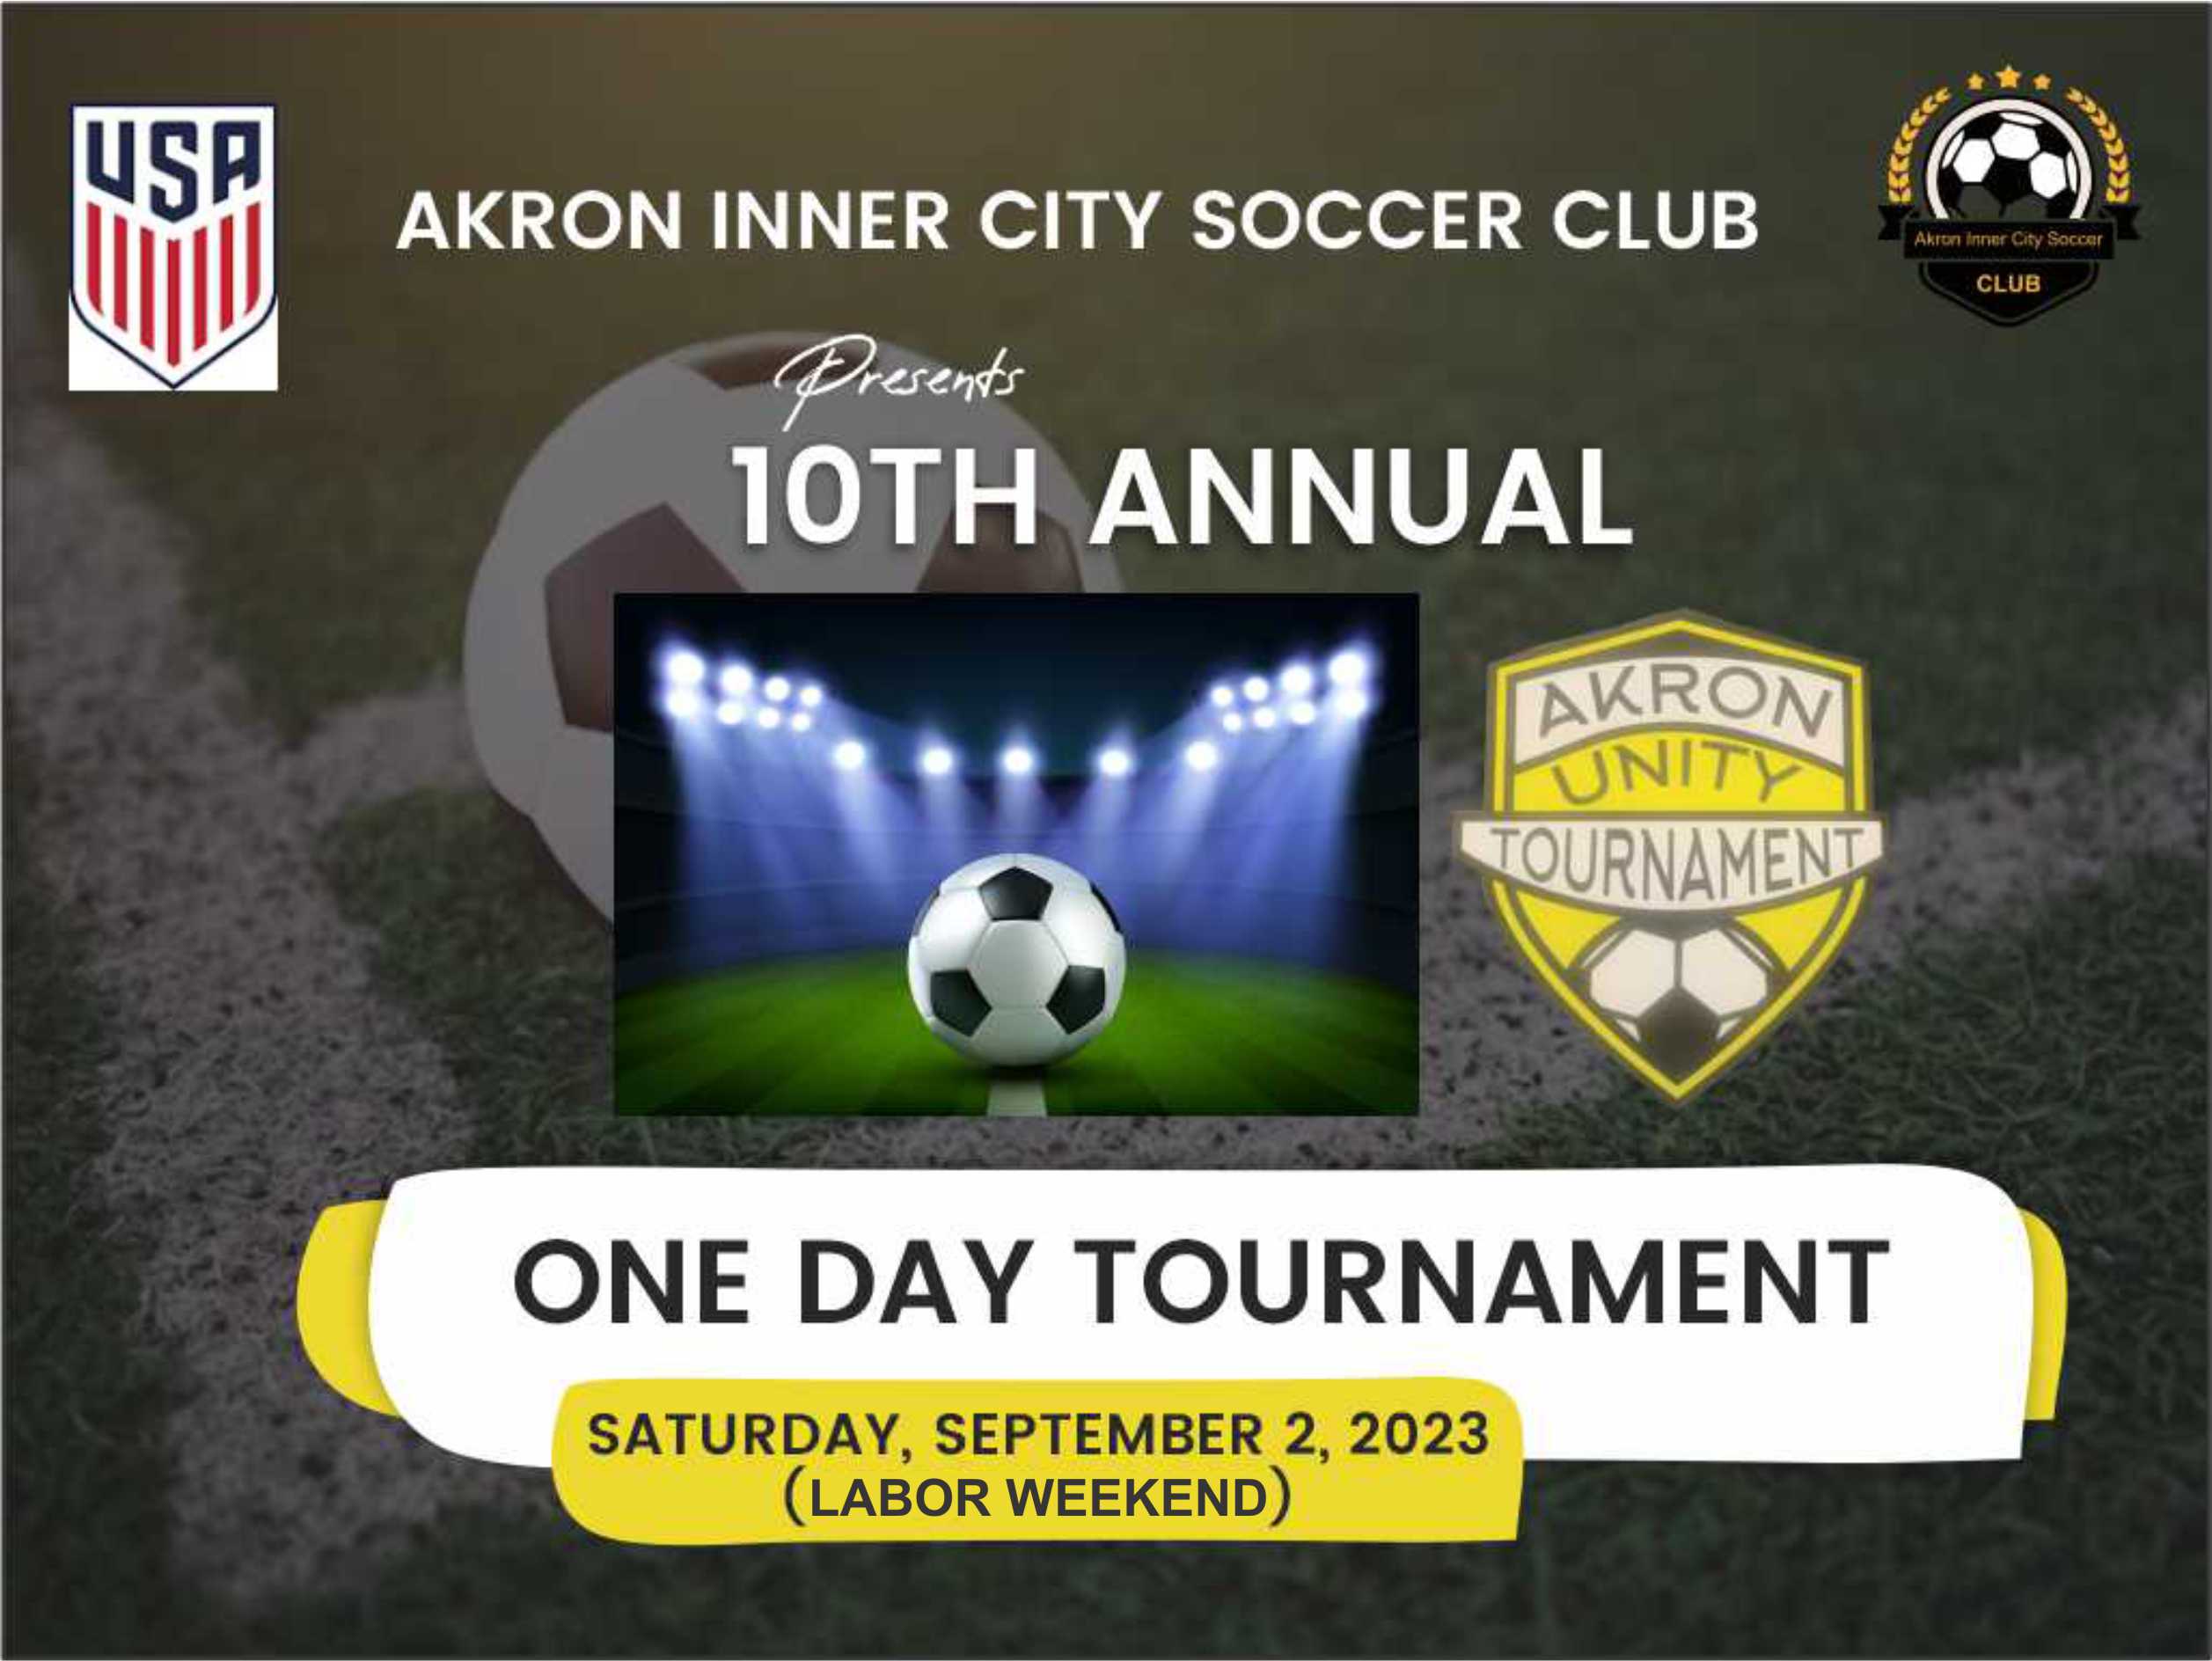 You are currently viewing 10TH ANNUAL AKRON UNITY TOURNAMENT REGISTRATION